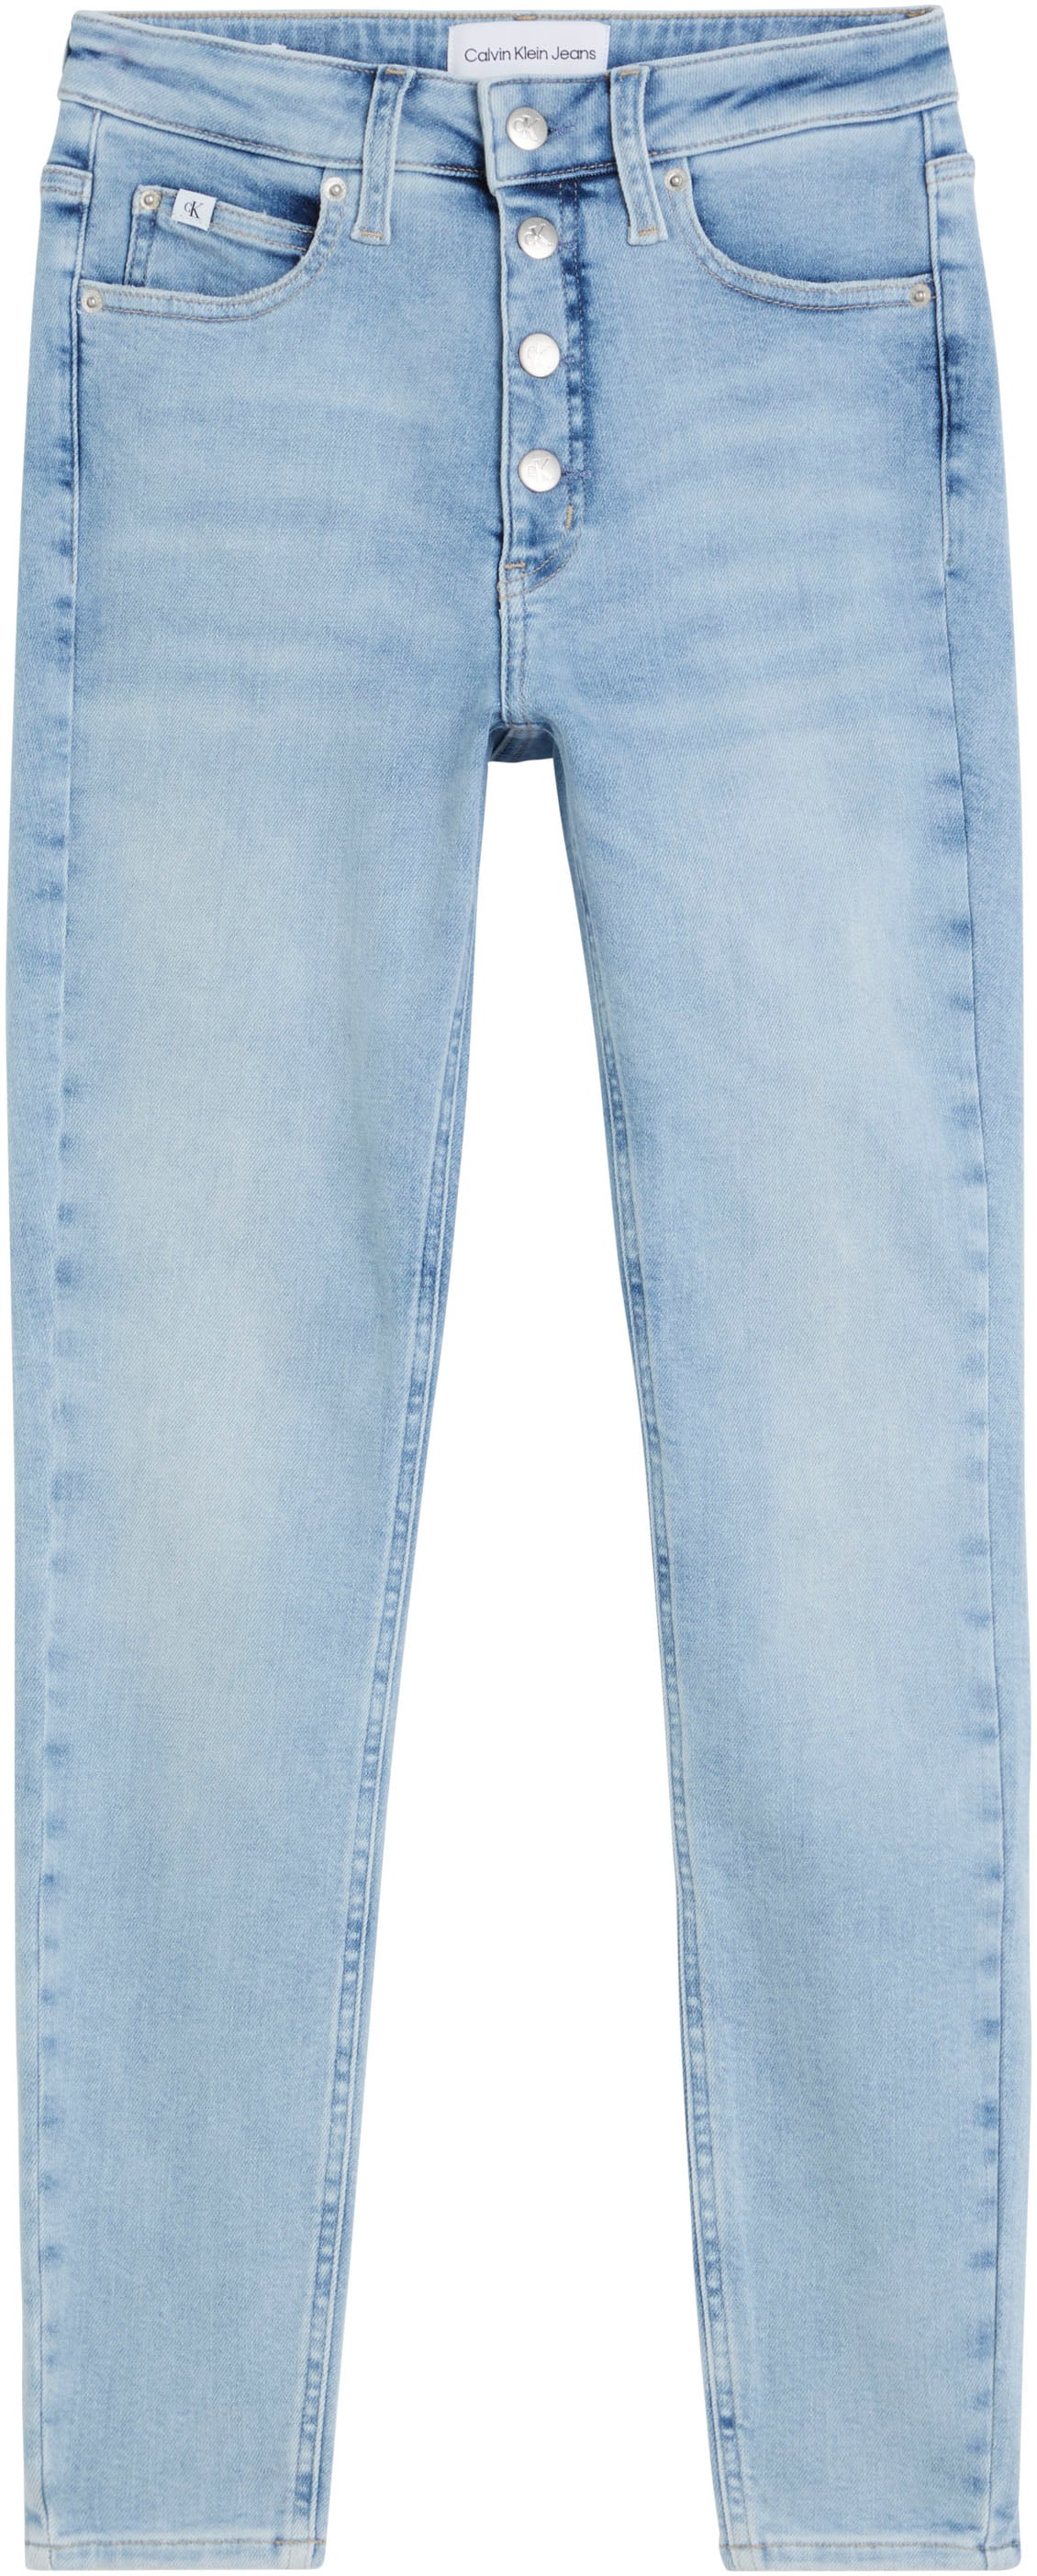 High Rise Super Skinny Ankle Jeans by Calvin Klein Jeans Online